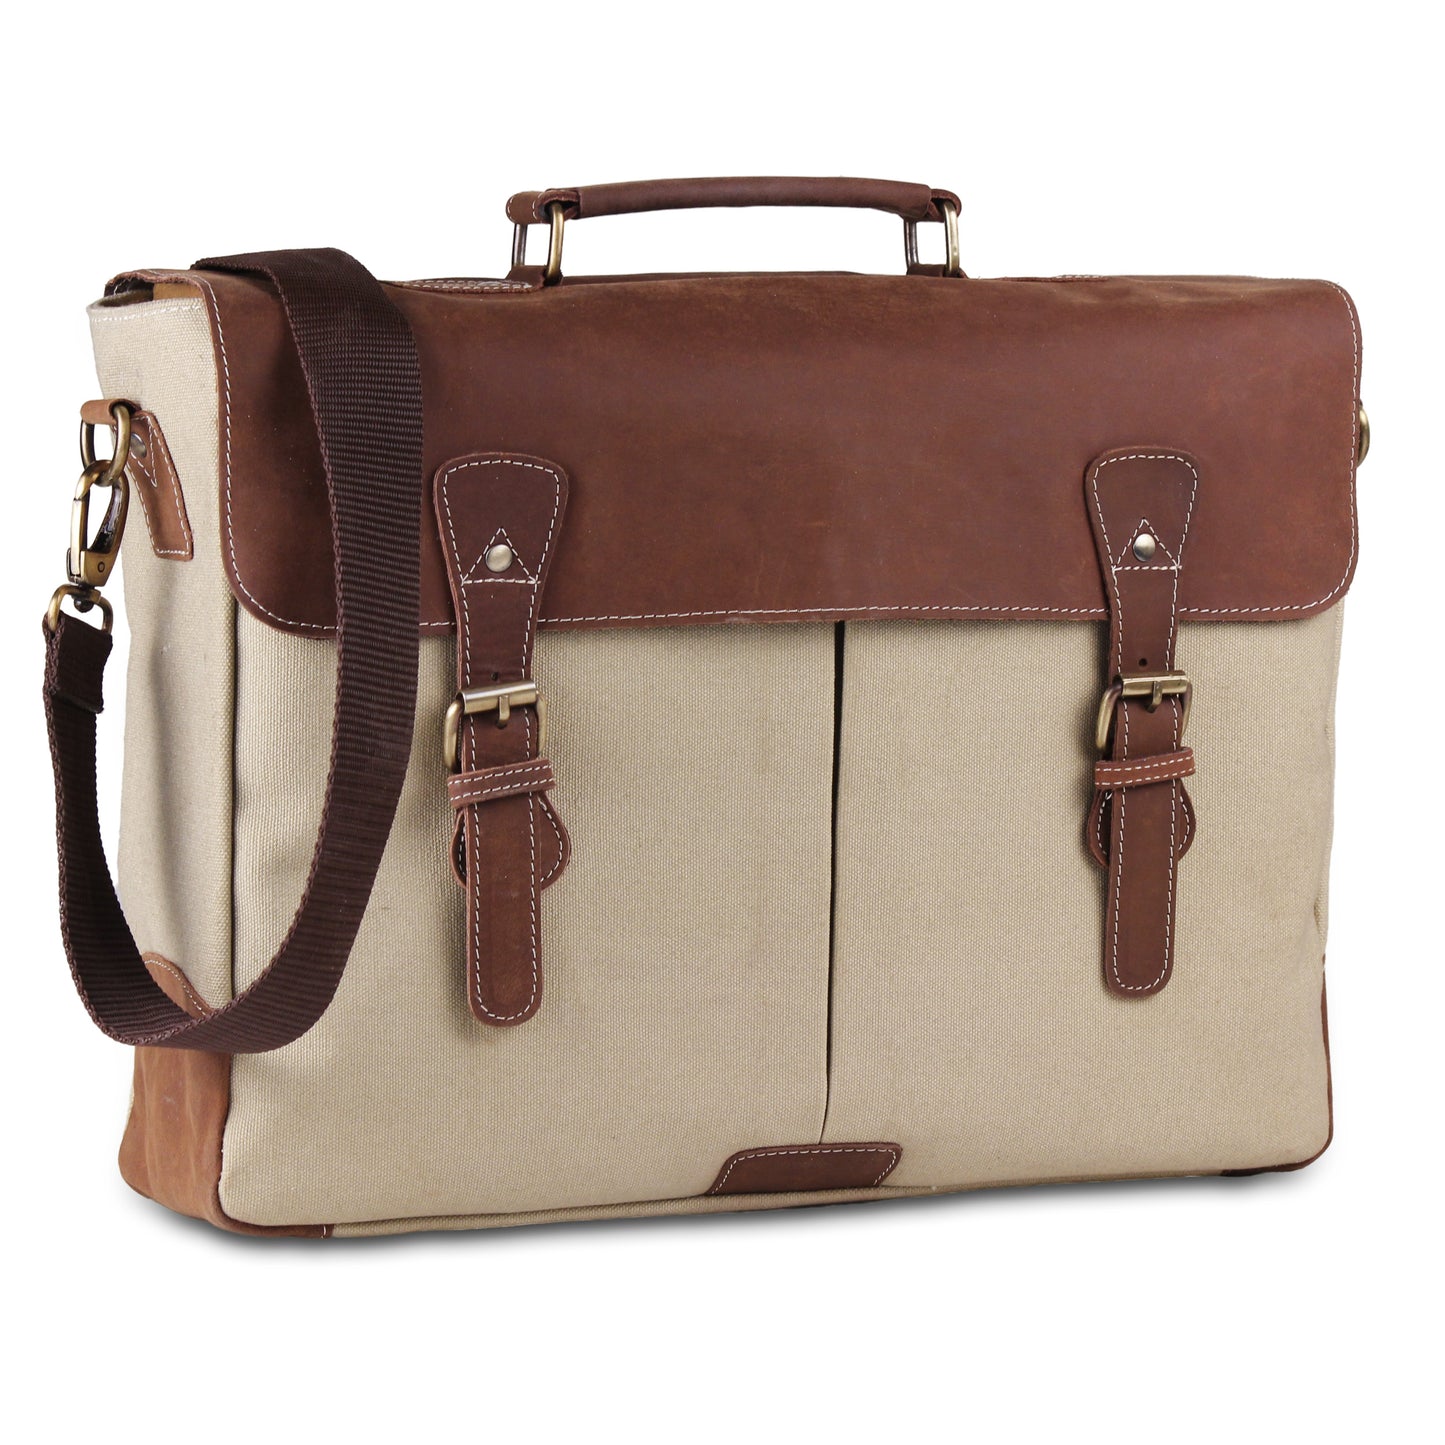 Genuine Leather Messenger Laptop Briefcase Bag with Top Handle and Adjustable strap Cream